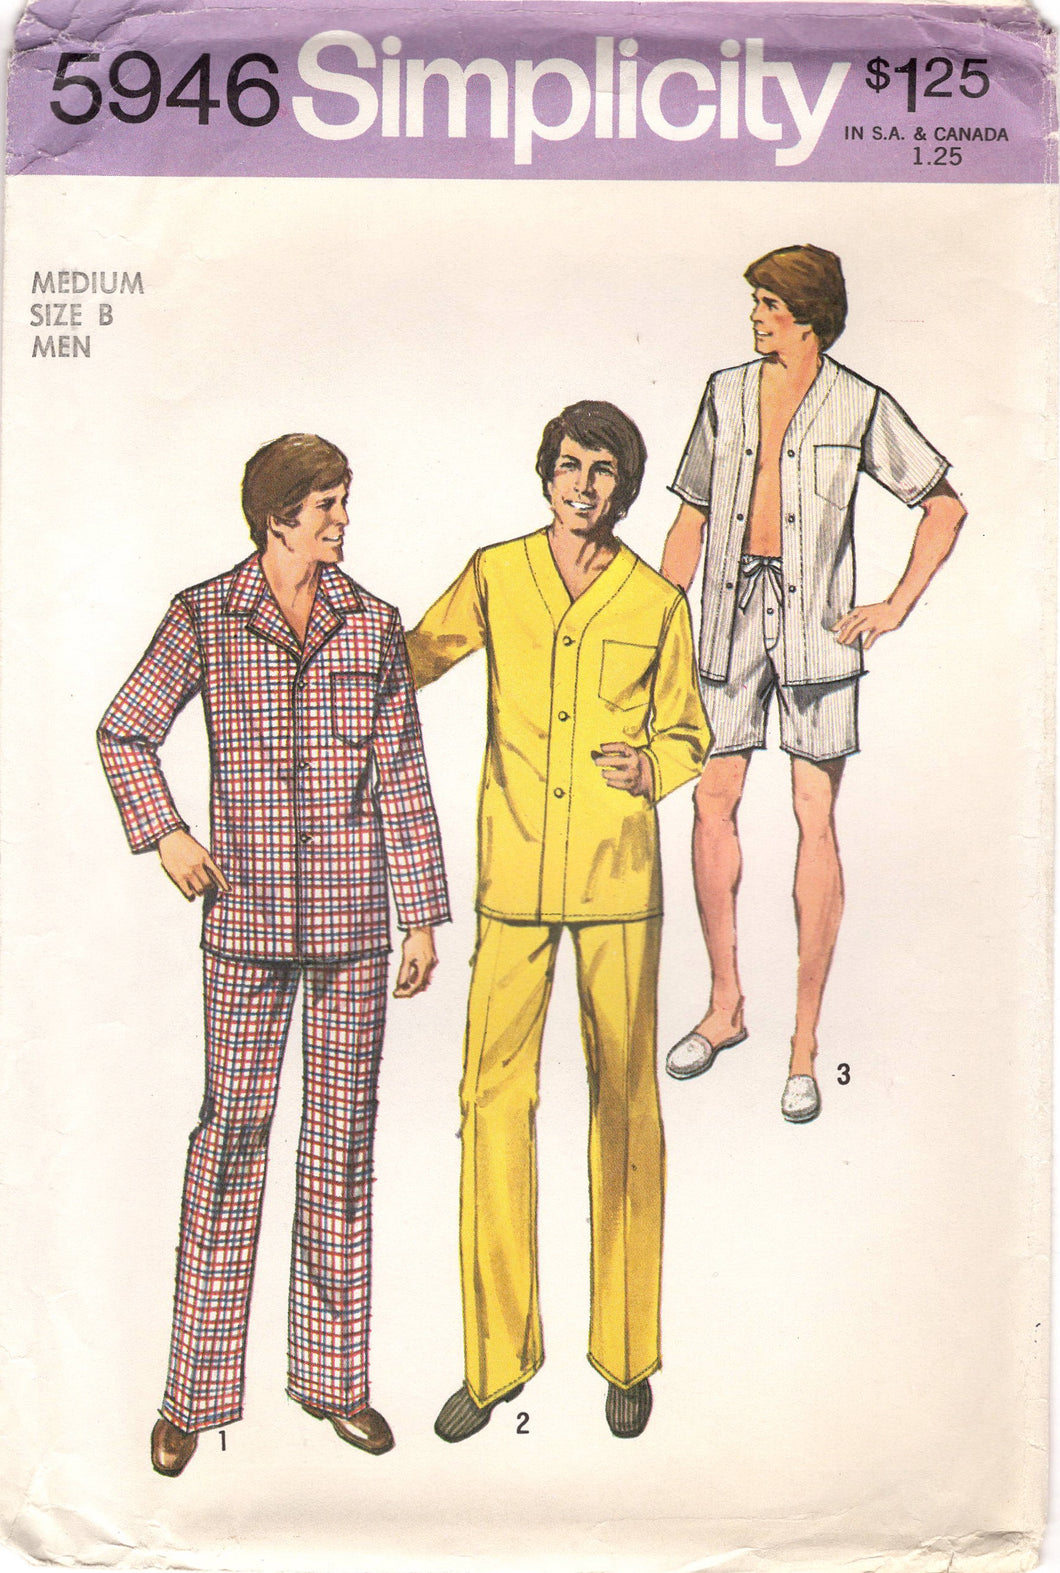 1970's Simplicity Men's Two Piece Pajama pattern - Chest 38-40